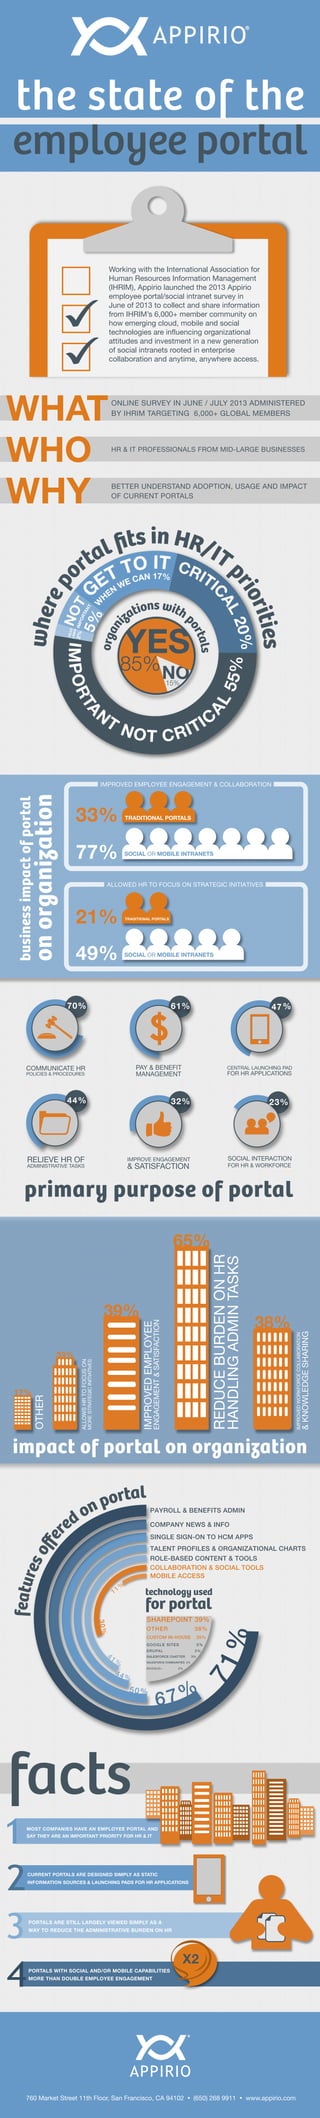 primary purpose of portal
ONLINE SURVEY IN JUNE / JULY 2013 ADMINISTERED
BY IHRIM TARGETING 6,000+ GLOBAL MEMBERS
HR & IT PROFESSIONALS FROM MID-LARGE BUSINESSES
BETTER UNDERSTAND ADOPTION, USAGE AND IMPACT
OF CURRENT PORTALS
wherep
ortal ﬁts in HR/IT
priorities
REDUCEBURDENONHR
HANDLINGADMINTASKS
IMPROVEDEMPLOYEE
ENGAGEMENT&SATISFACTION
IMPROVEDWORKFORCECOLLABORATION
&KNOWLEDGESHARING
ALLOWSHRTOFOCUSON
MORESTRATEGICINITIATIVES
OTHER
17%
33%
39%
38%
65%
impact of portal on organization
the state of the
employee portal
facts
MOST COMPANIES HAVE AN EMPLOYEE PORTAL AND
SAY THEY ARE AN IMPORTANT PRIORITY FOR HR & IT
CURRENT PORTALS ARE DESIGNED SIMPLY AS STATIC
INFORMATION SOURCES & LAUNCHING PADS FOR HR APPLICATIONS
PORTALS ARE STILL LARGELY VIEWED SIMPLY AS A
WAY TO REDUCE THE ADMINISTRATIVE BURDEN ON HR
PORTALS WITH SOCIAL AND/OR MOBILE CAPABILITIES
MORE THAN DOUBLE EMPLOYEE ENGAGEMENT
X2
technology used
for portal
SOCIAL OR MOBILE INTRANETS
SOCIAL OR MOBILE INTRANETS
businessimpactofportal
onorganization
TRADITIONAL PORTALS
760 Market Street 11th Floor, San Francisco, CA 94102 • (650) 268 9911 • www.appirio.com
IMPROVED EMPLOYEE ENGAGEMENT & COLLABORATION
ALLOWED HR TO FOCUS ON STRATEGIC INITIATIVES
Working with the International Association for
Human Resources Information Management
(IHRIM), Appirio launched the 2013 Appirio
employee portal/social intranet survey in
June of 2013 to collect and share information
from IHRIM’s 6,000+ member community on
how emerging cloud, mobile and social
technologies are influencing organizational
attitudes and investment in a new generation
of social intranets rooted in enterprise
collaboration and anytime, anywhere access.
 